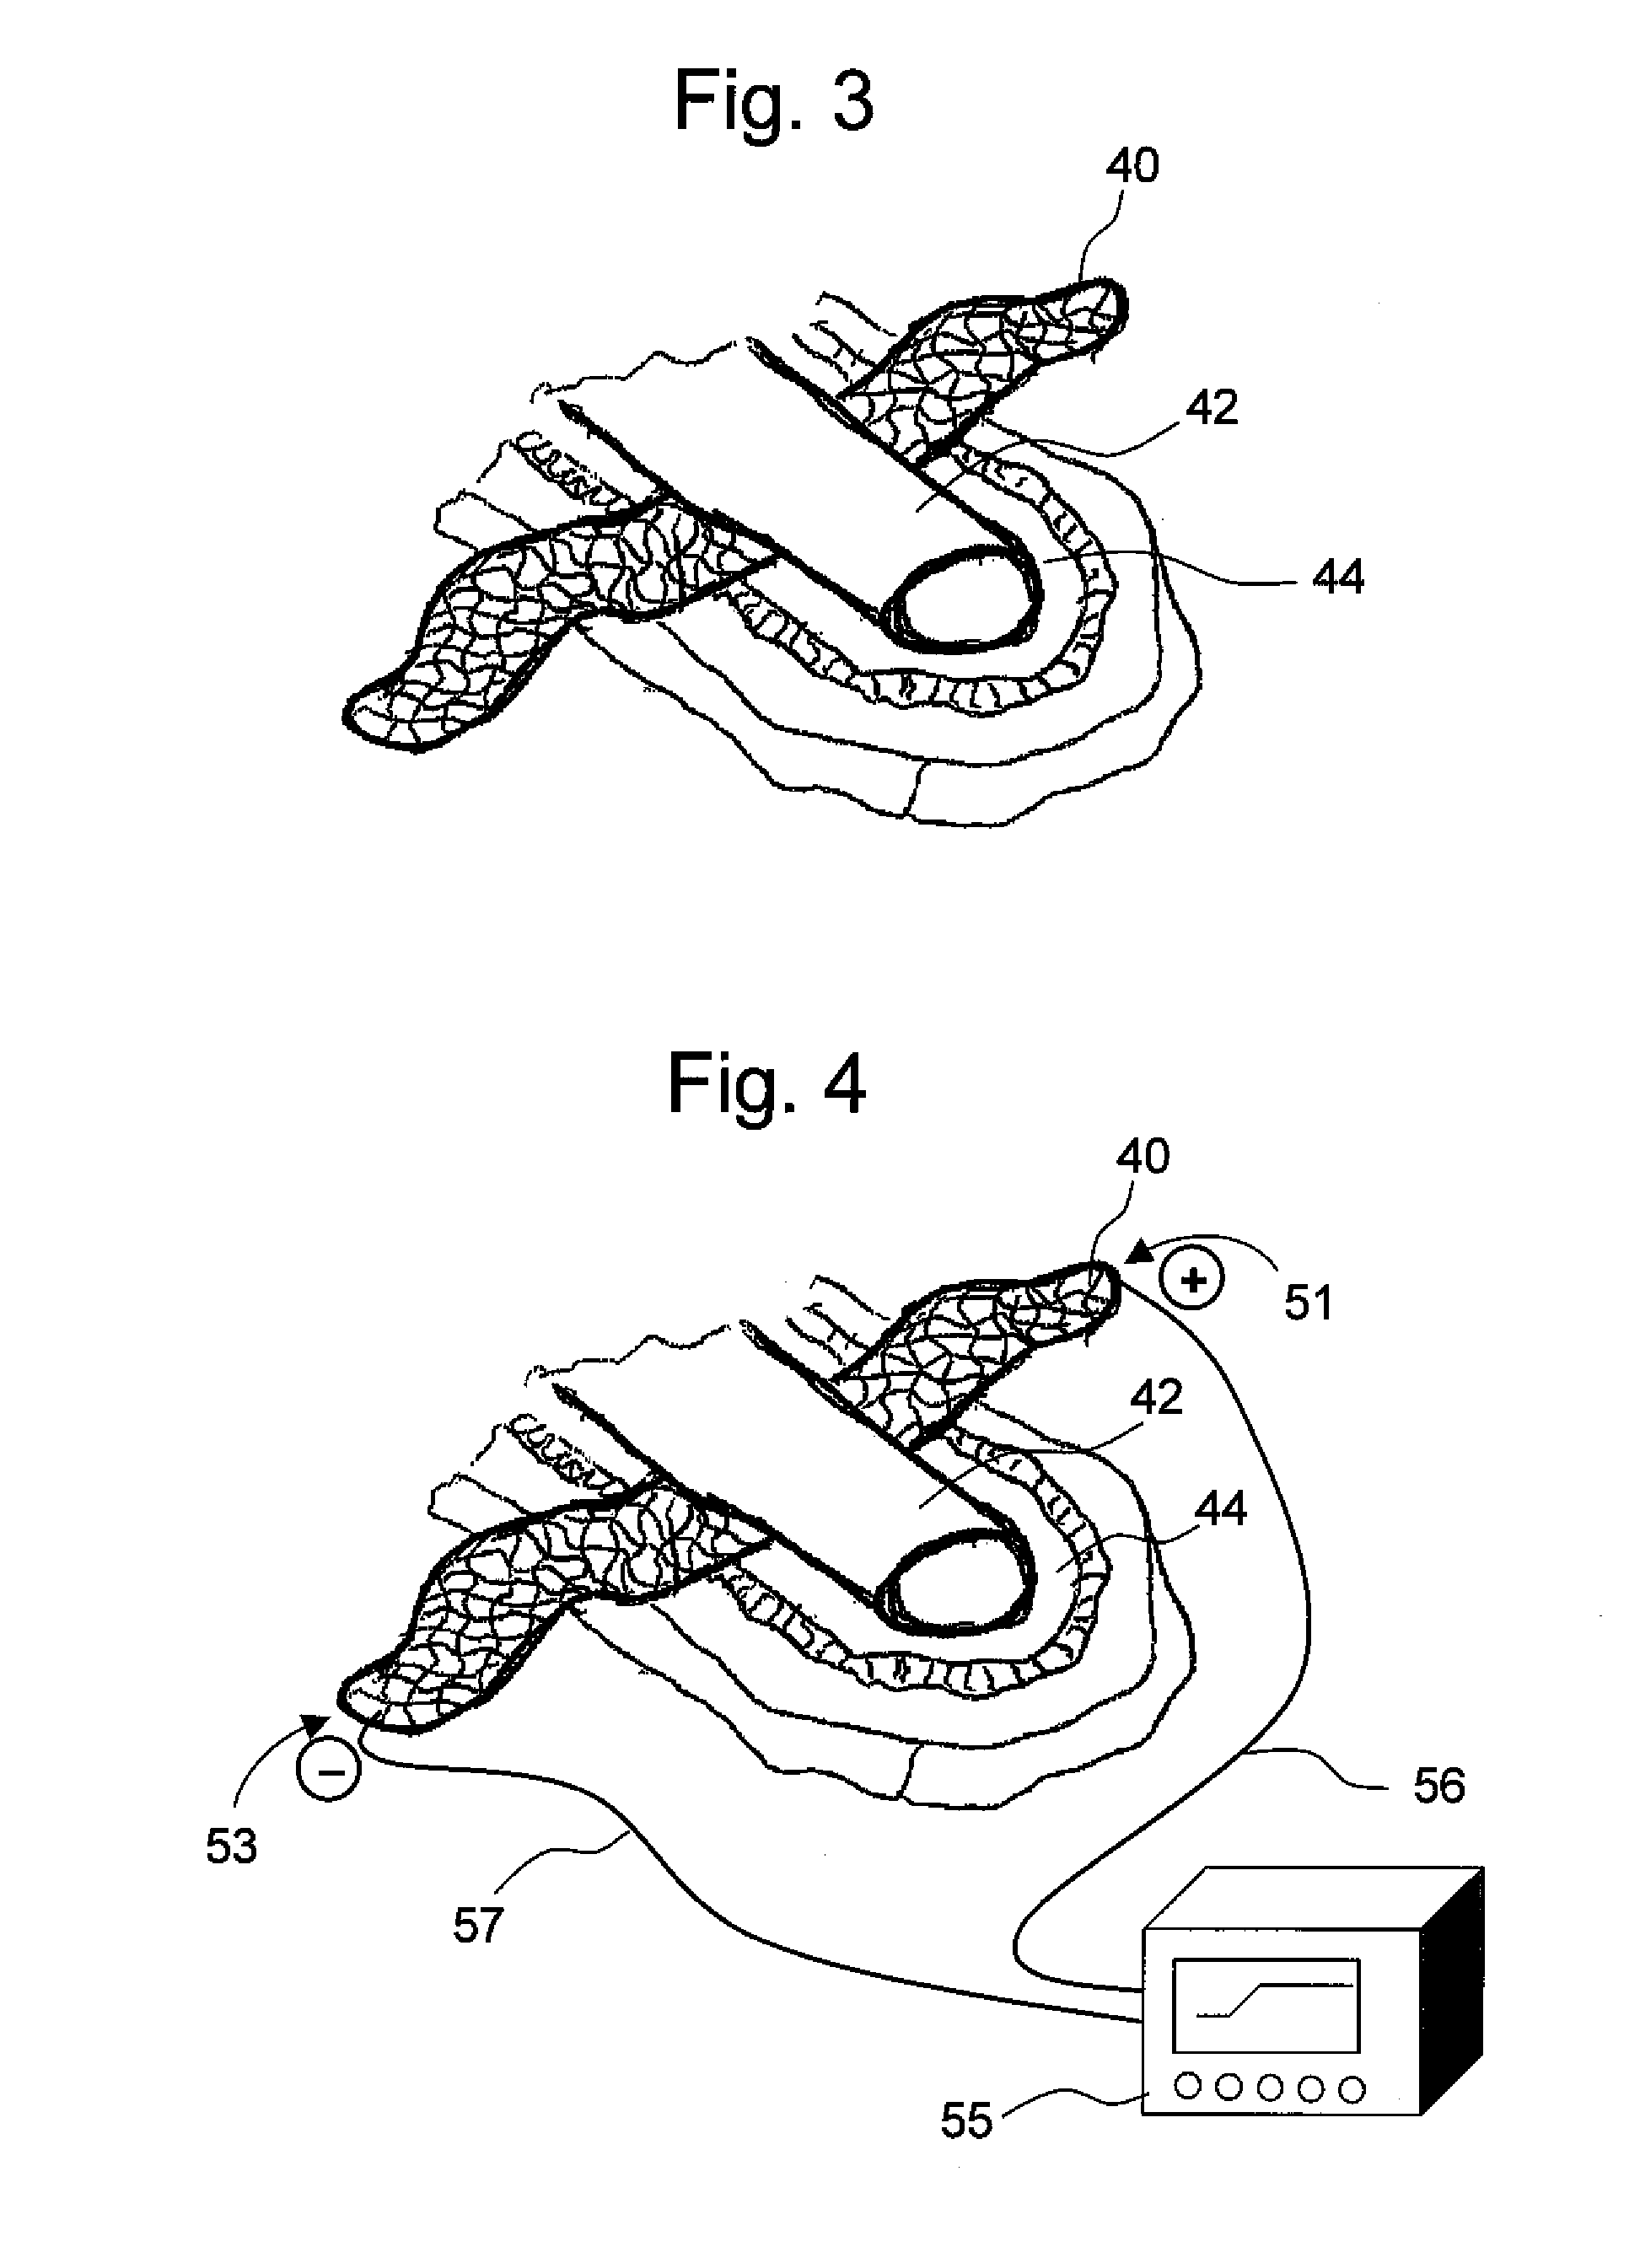 Conductive and degradable implant for pelvic tissue treatment